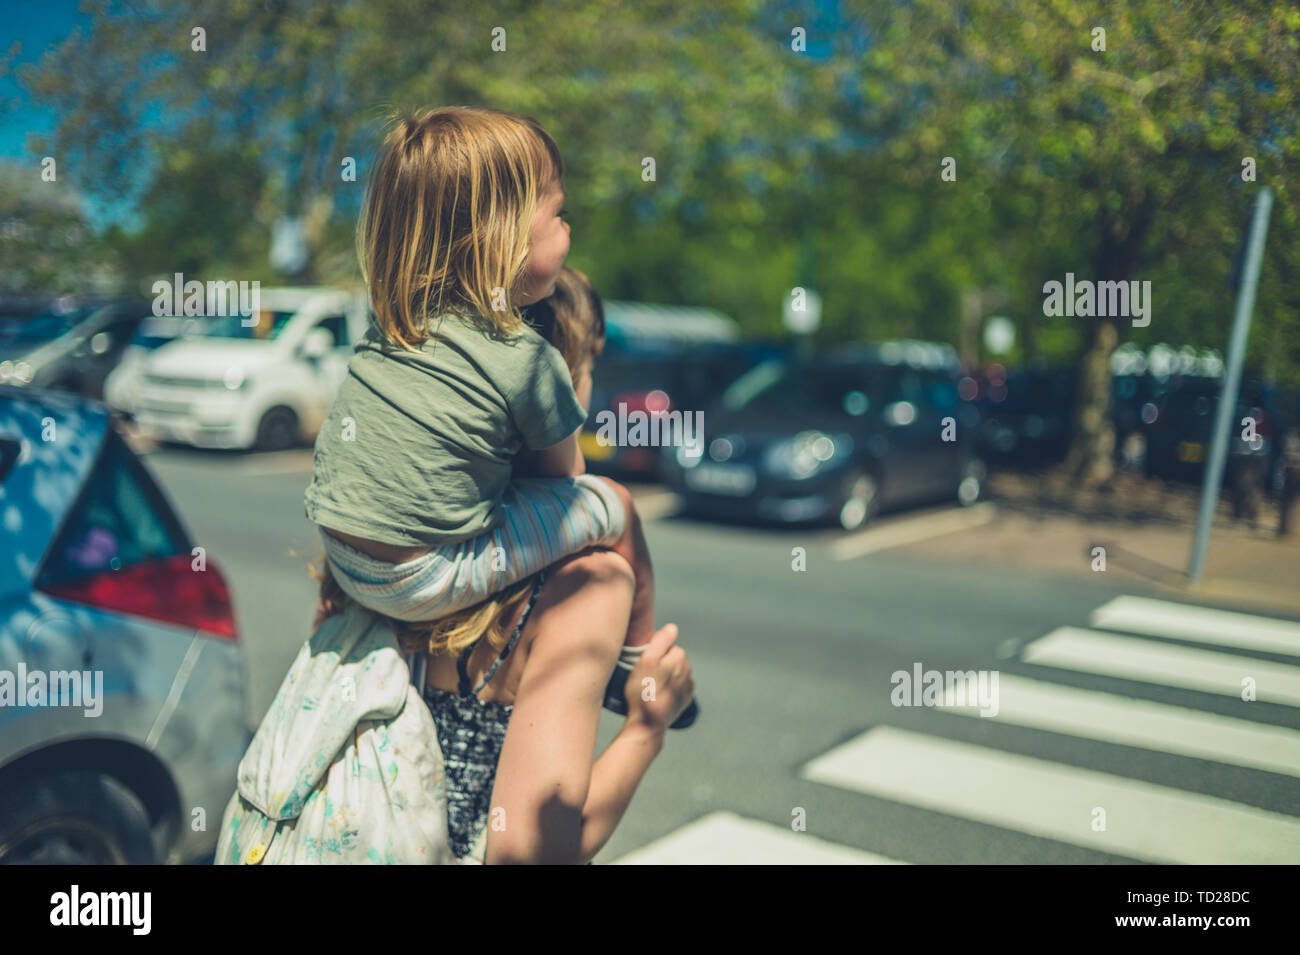 A little toddler is riding on his mother's shoulders in a car park on a sunnny summer day Stock Photo